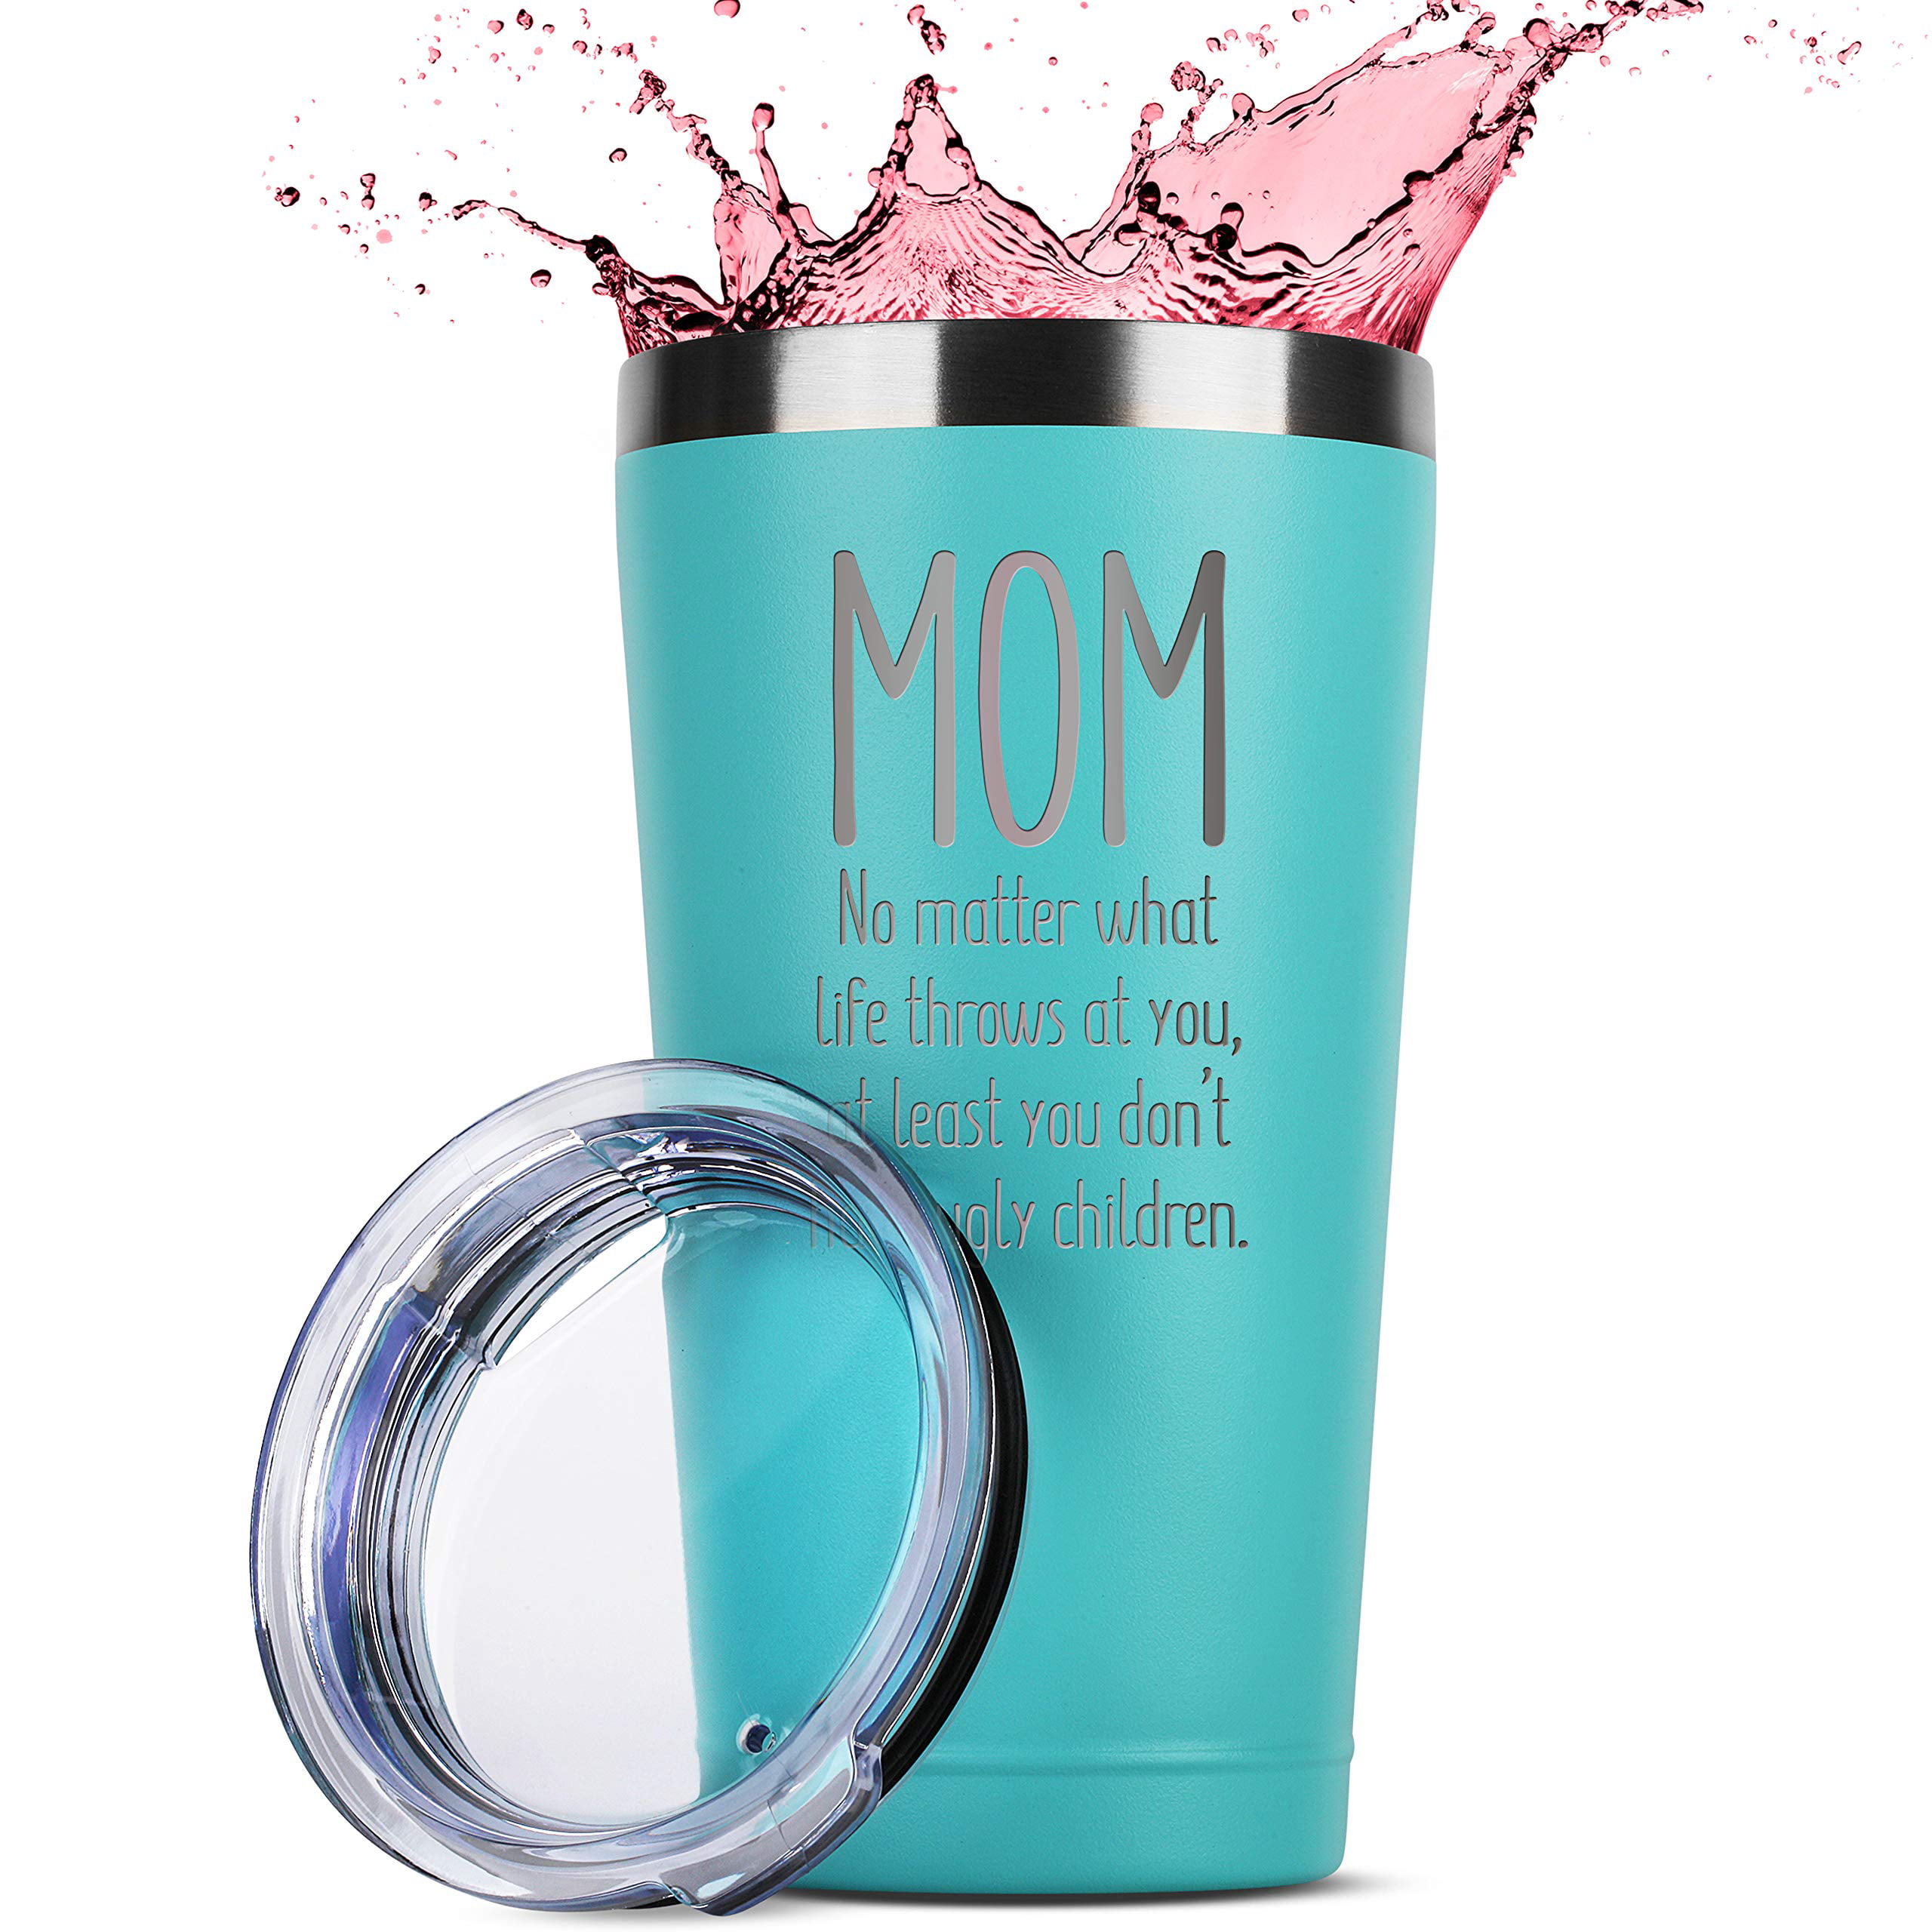 Birthday Mothers Day Christmas Gift Ideas from Daughter Son Mother Moms Madre Gifts Idea Kid Children Ugly Children Mom 16 oz Mint Insulated Stainless Steel Tumbler w//Lid Mug Cup for Women